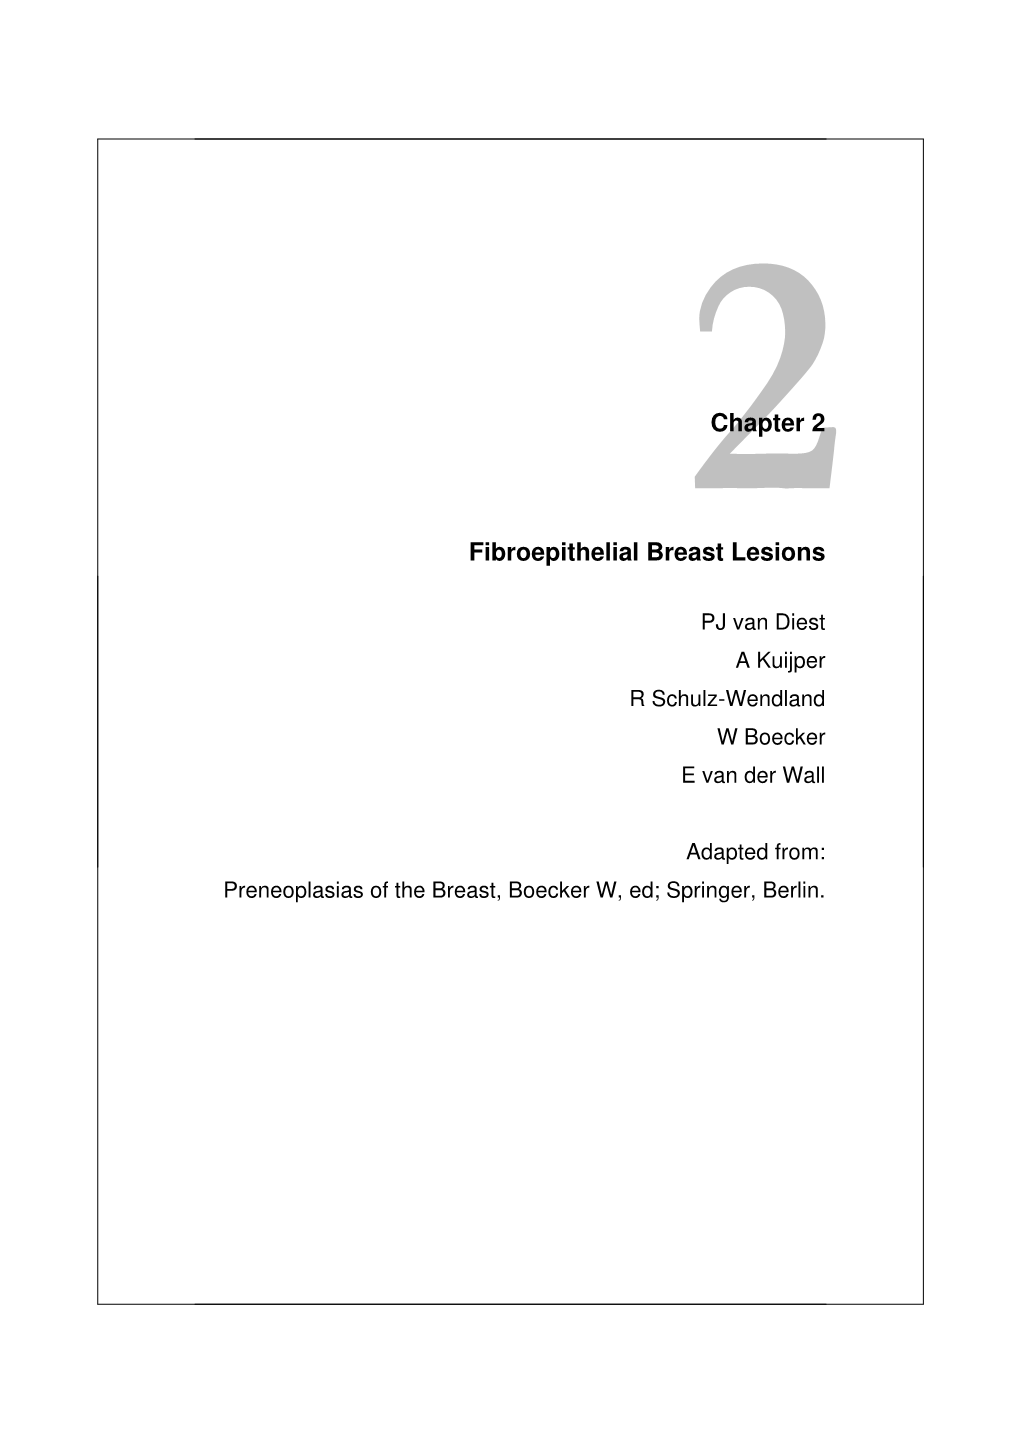 Chapter 2 Fibroepithelial Breast Lesions